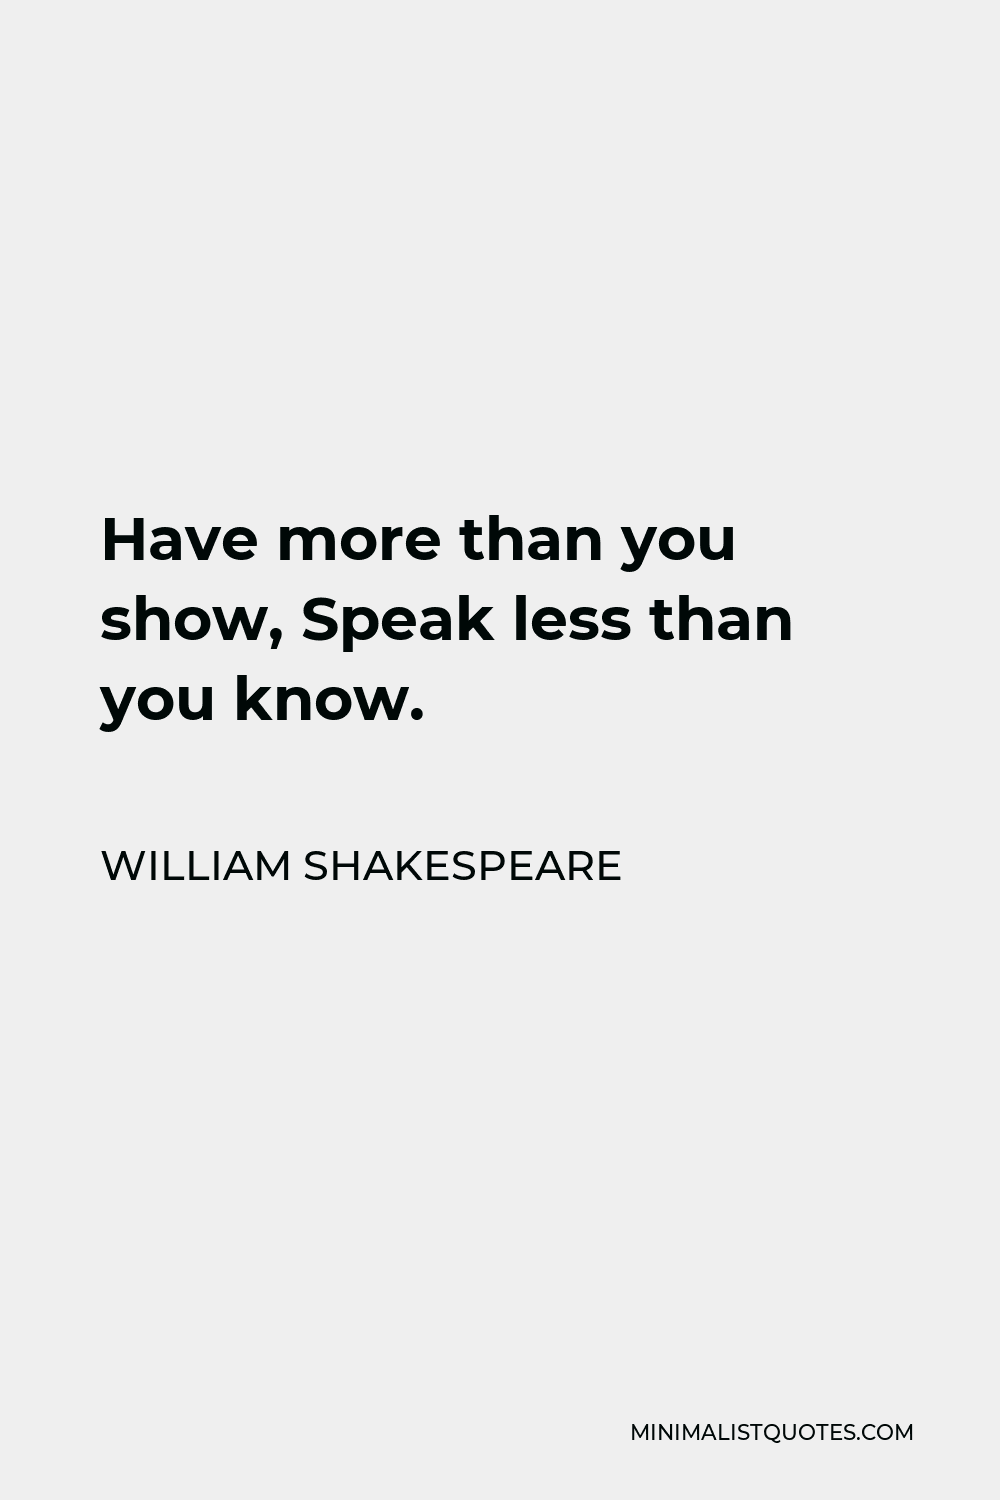 William Shakespeare Quote - Have more than you show, Speak less than you know.